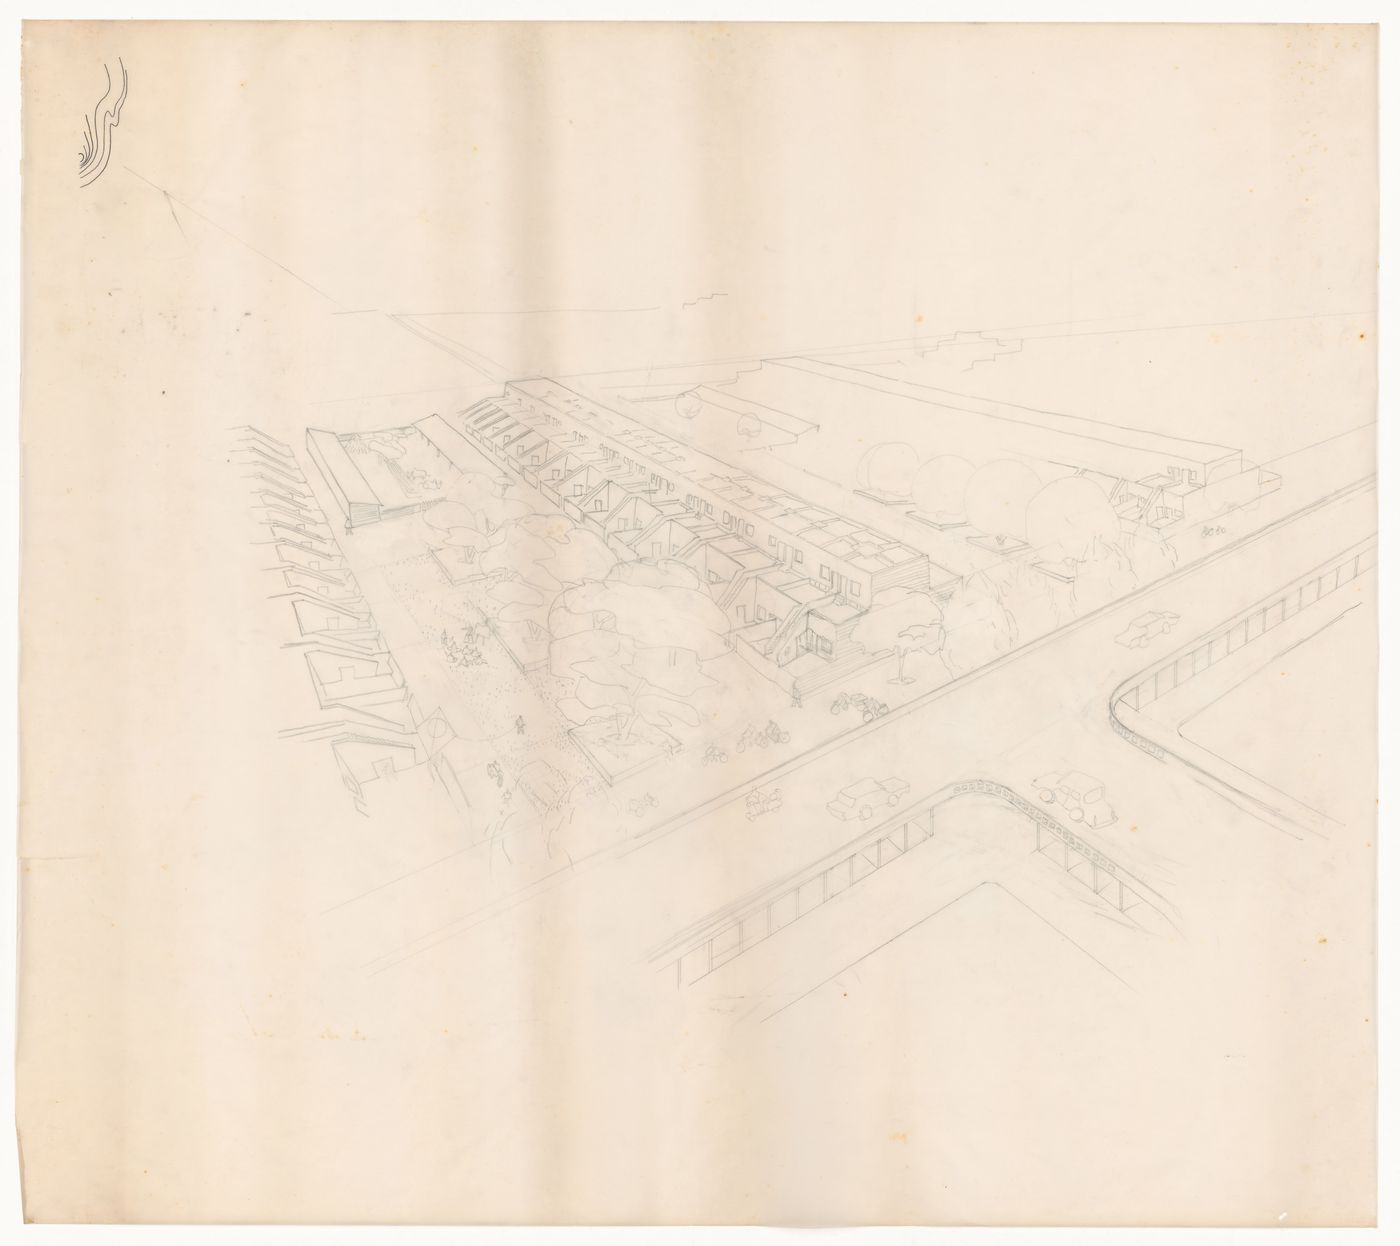 Perspective sketch of housing block for Linear city, Chandigarh, India